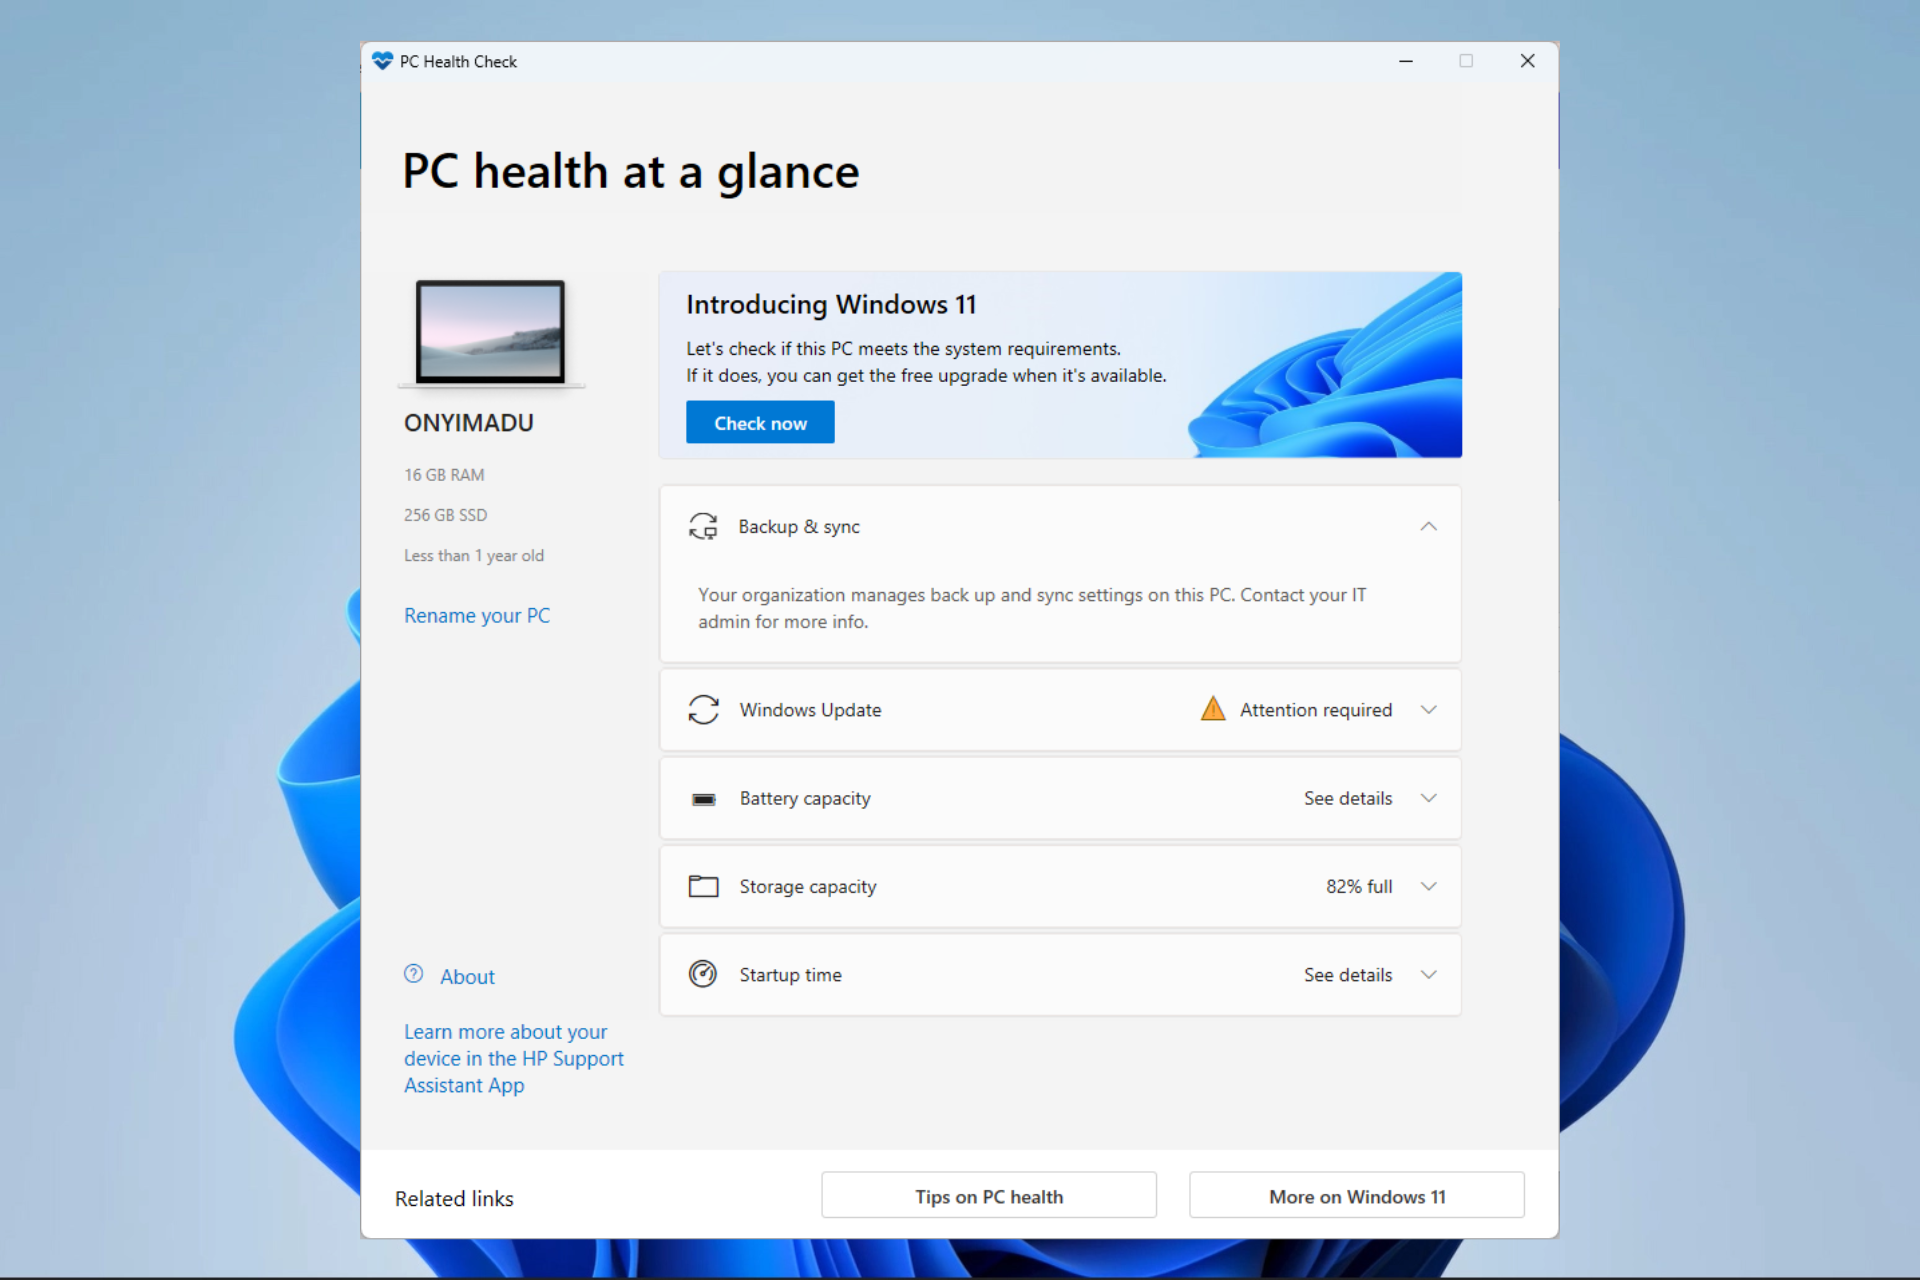 Download Pc Health Check To Test Your Pc For Windows 11